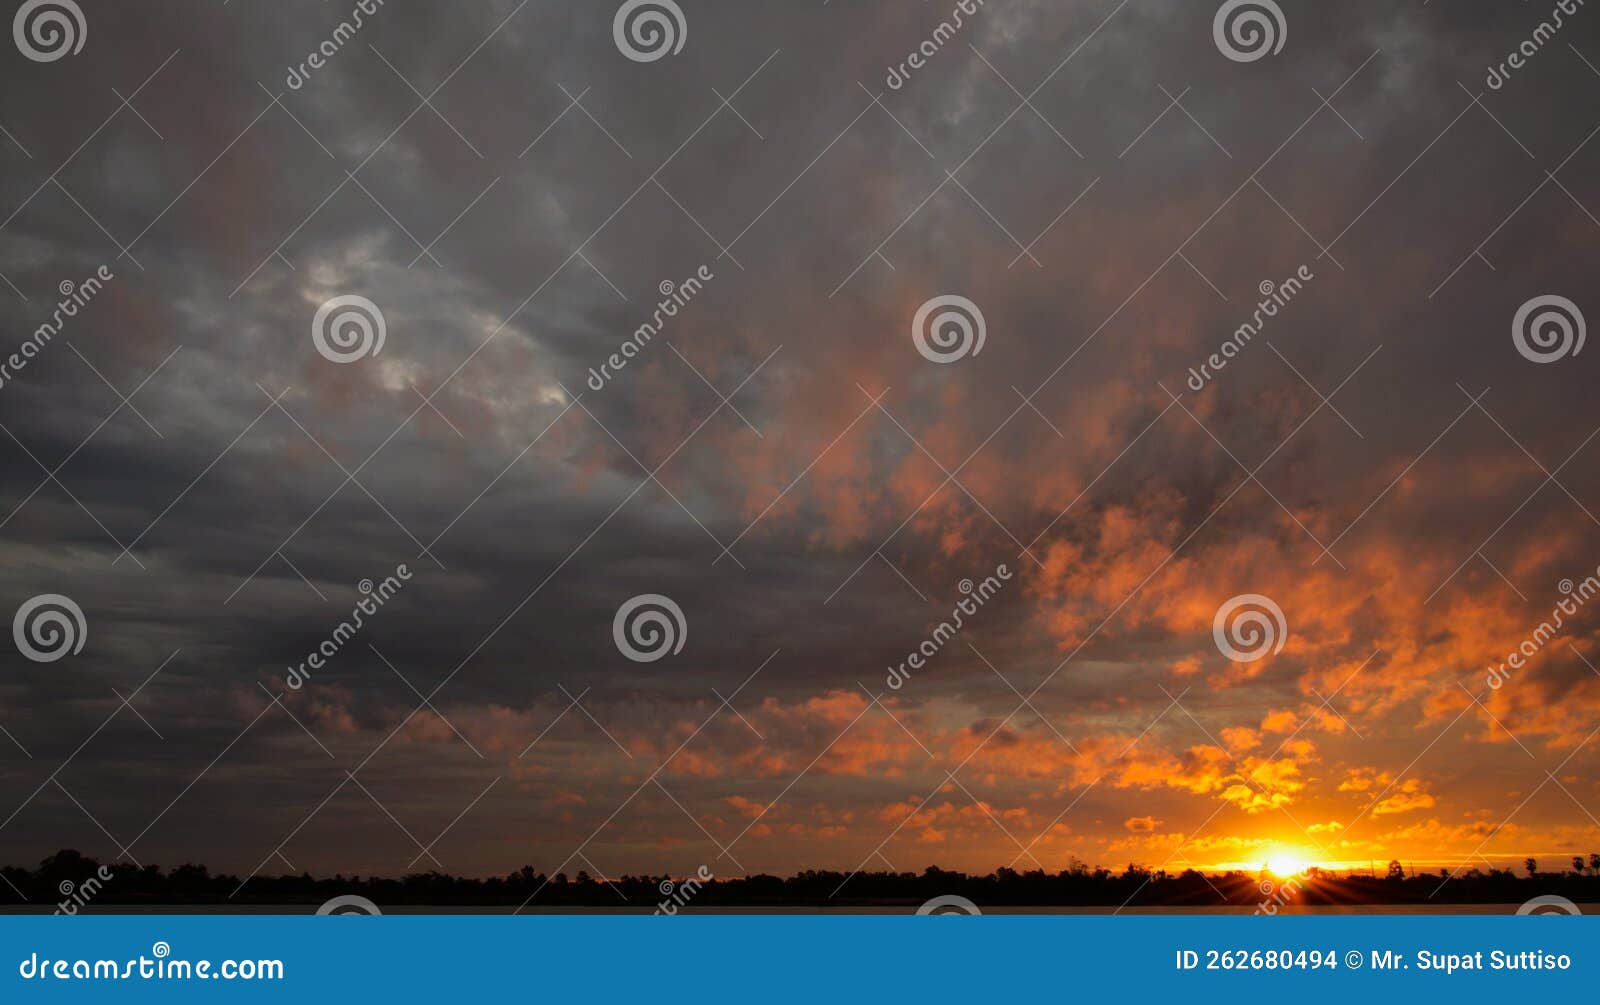 dramatic orange sky with black clouds at dusk, the weather is inclement. cover  template for book, magazine, website